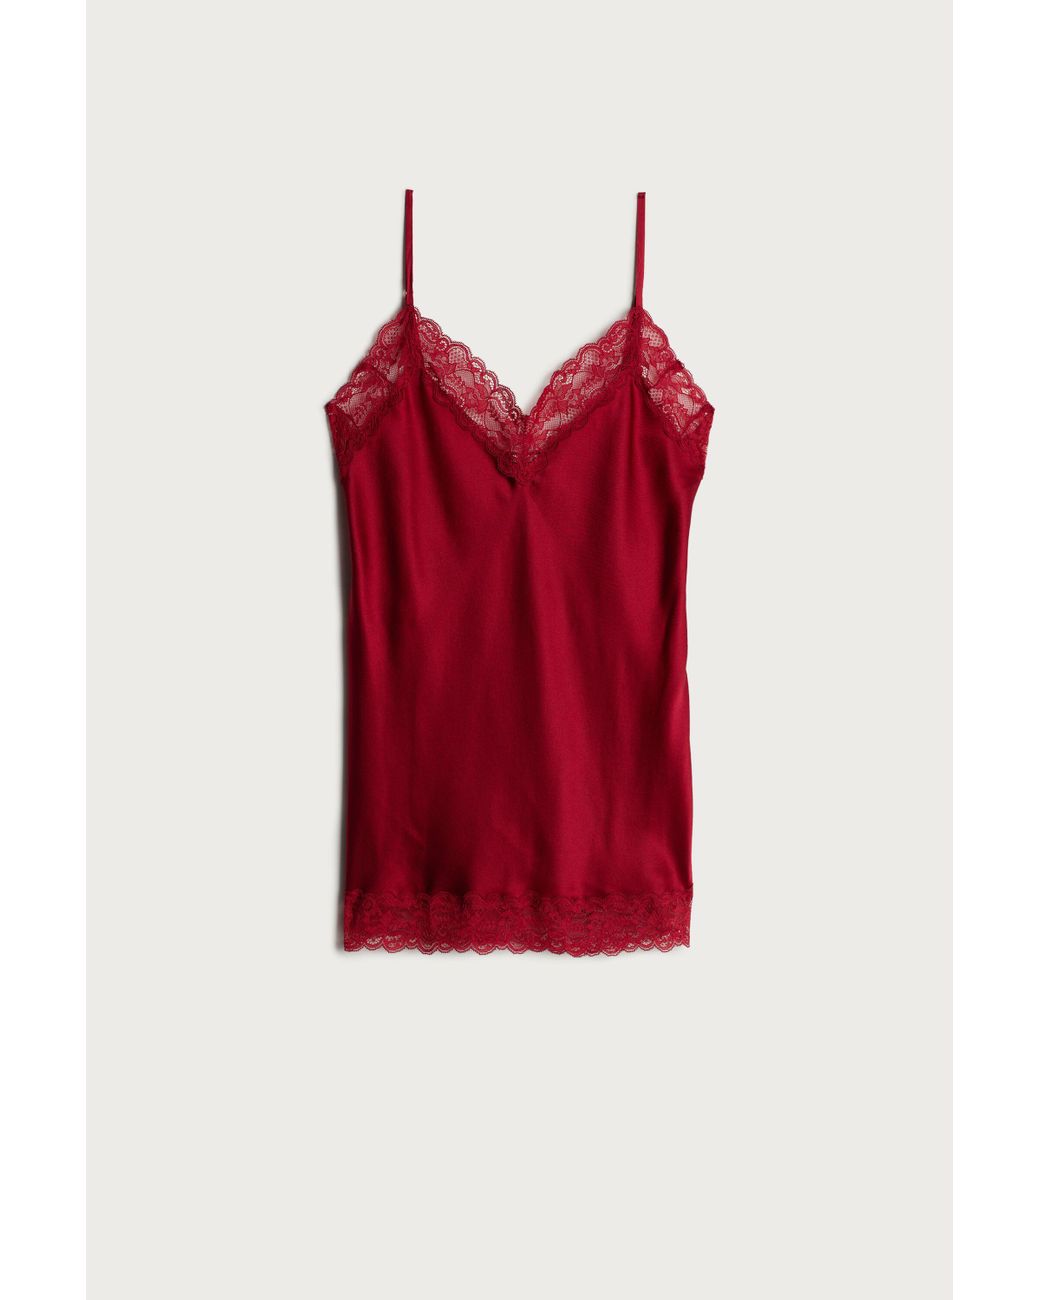 Intimissimi Womens Lace and Silk Top